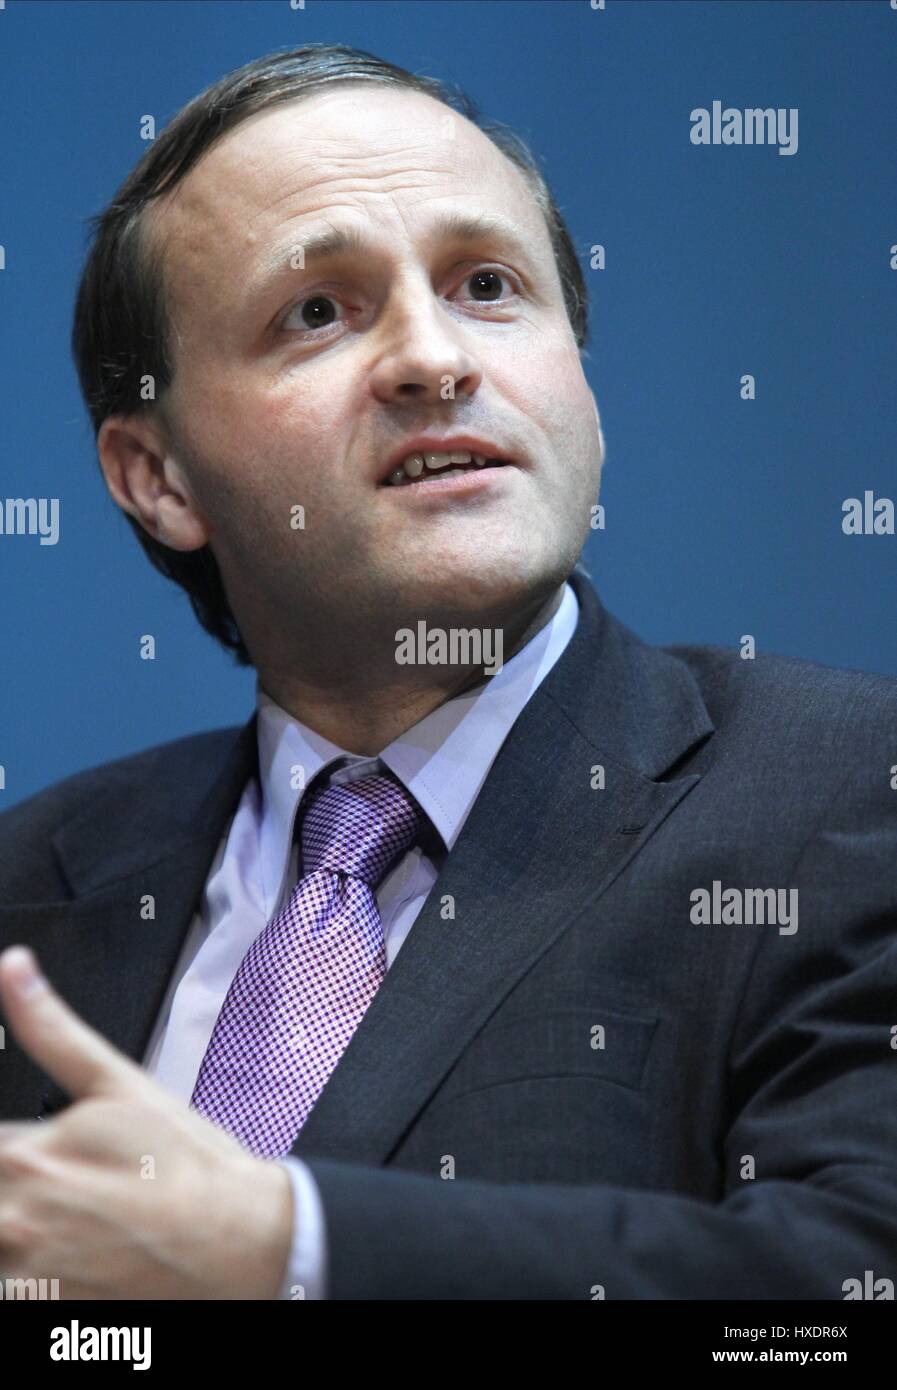 STEVE WEBB MP MINISTER OF STATE FOR PENSIONS 21 September 2010 THE AAC LIVERPOOL ENGLAND Stock Photo